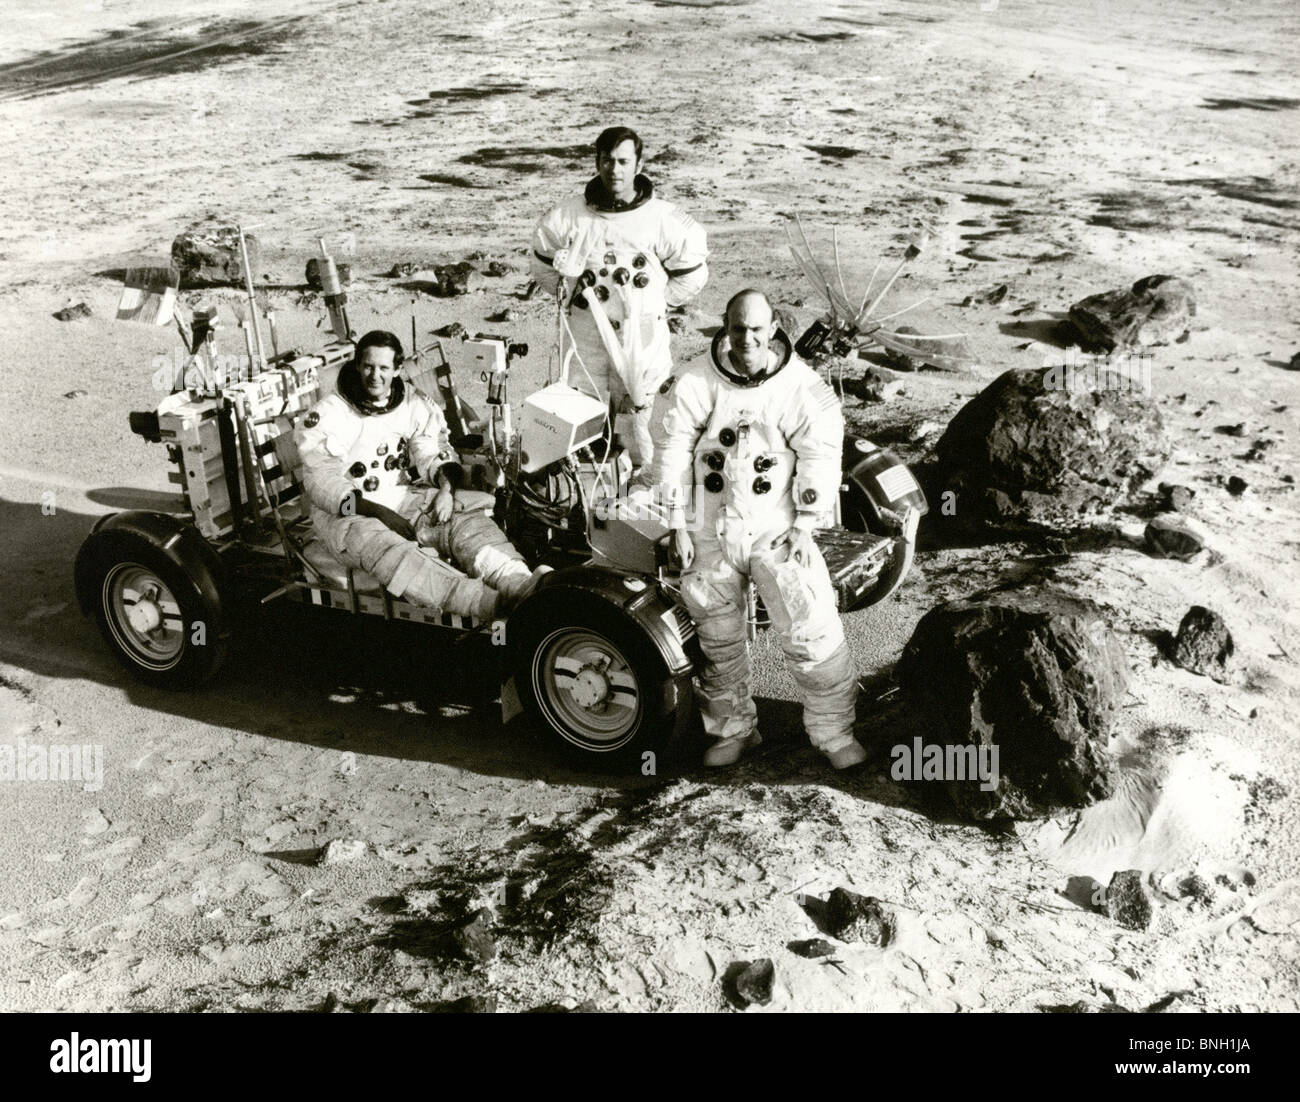 Apollo 16 astronauts Charles M. Duke, Commander John W. Young, and Thomas K. Mattingly II during a training exercise Stock Photo